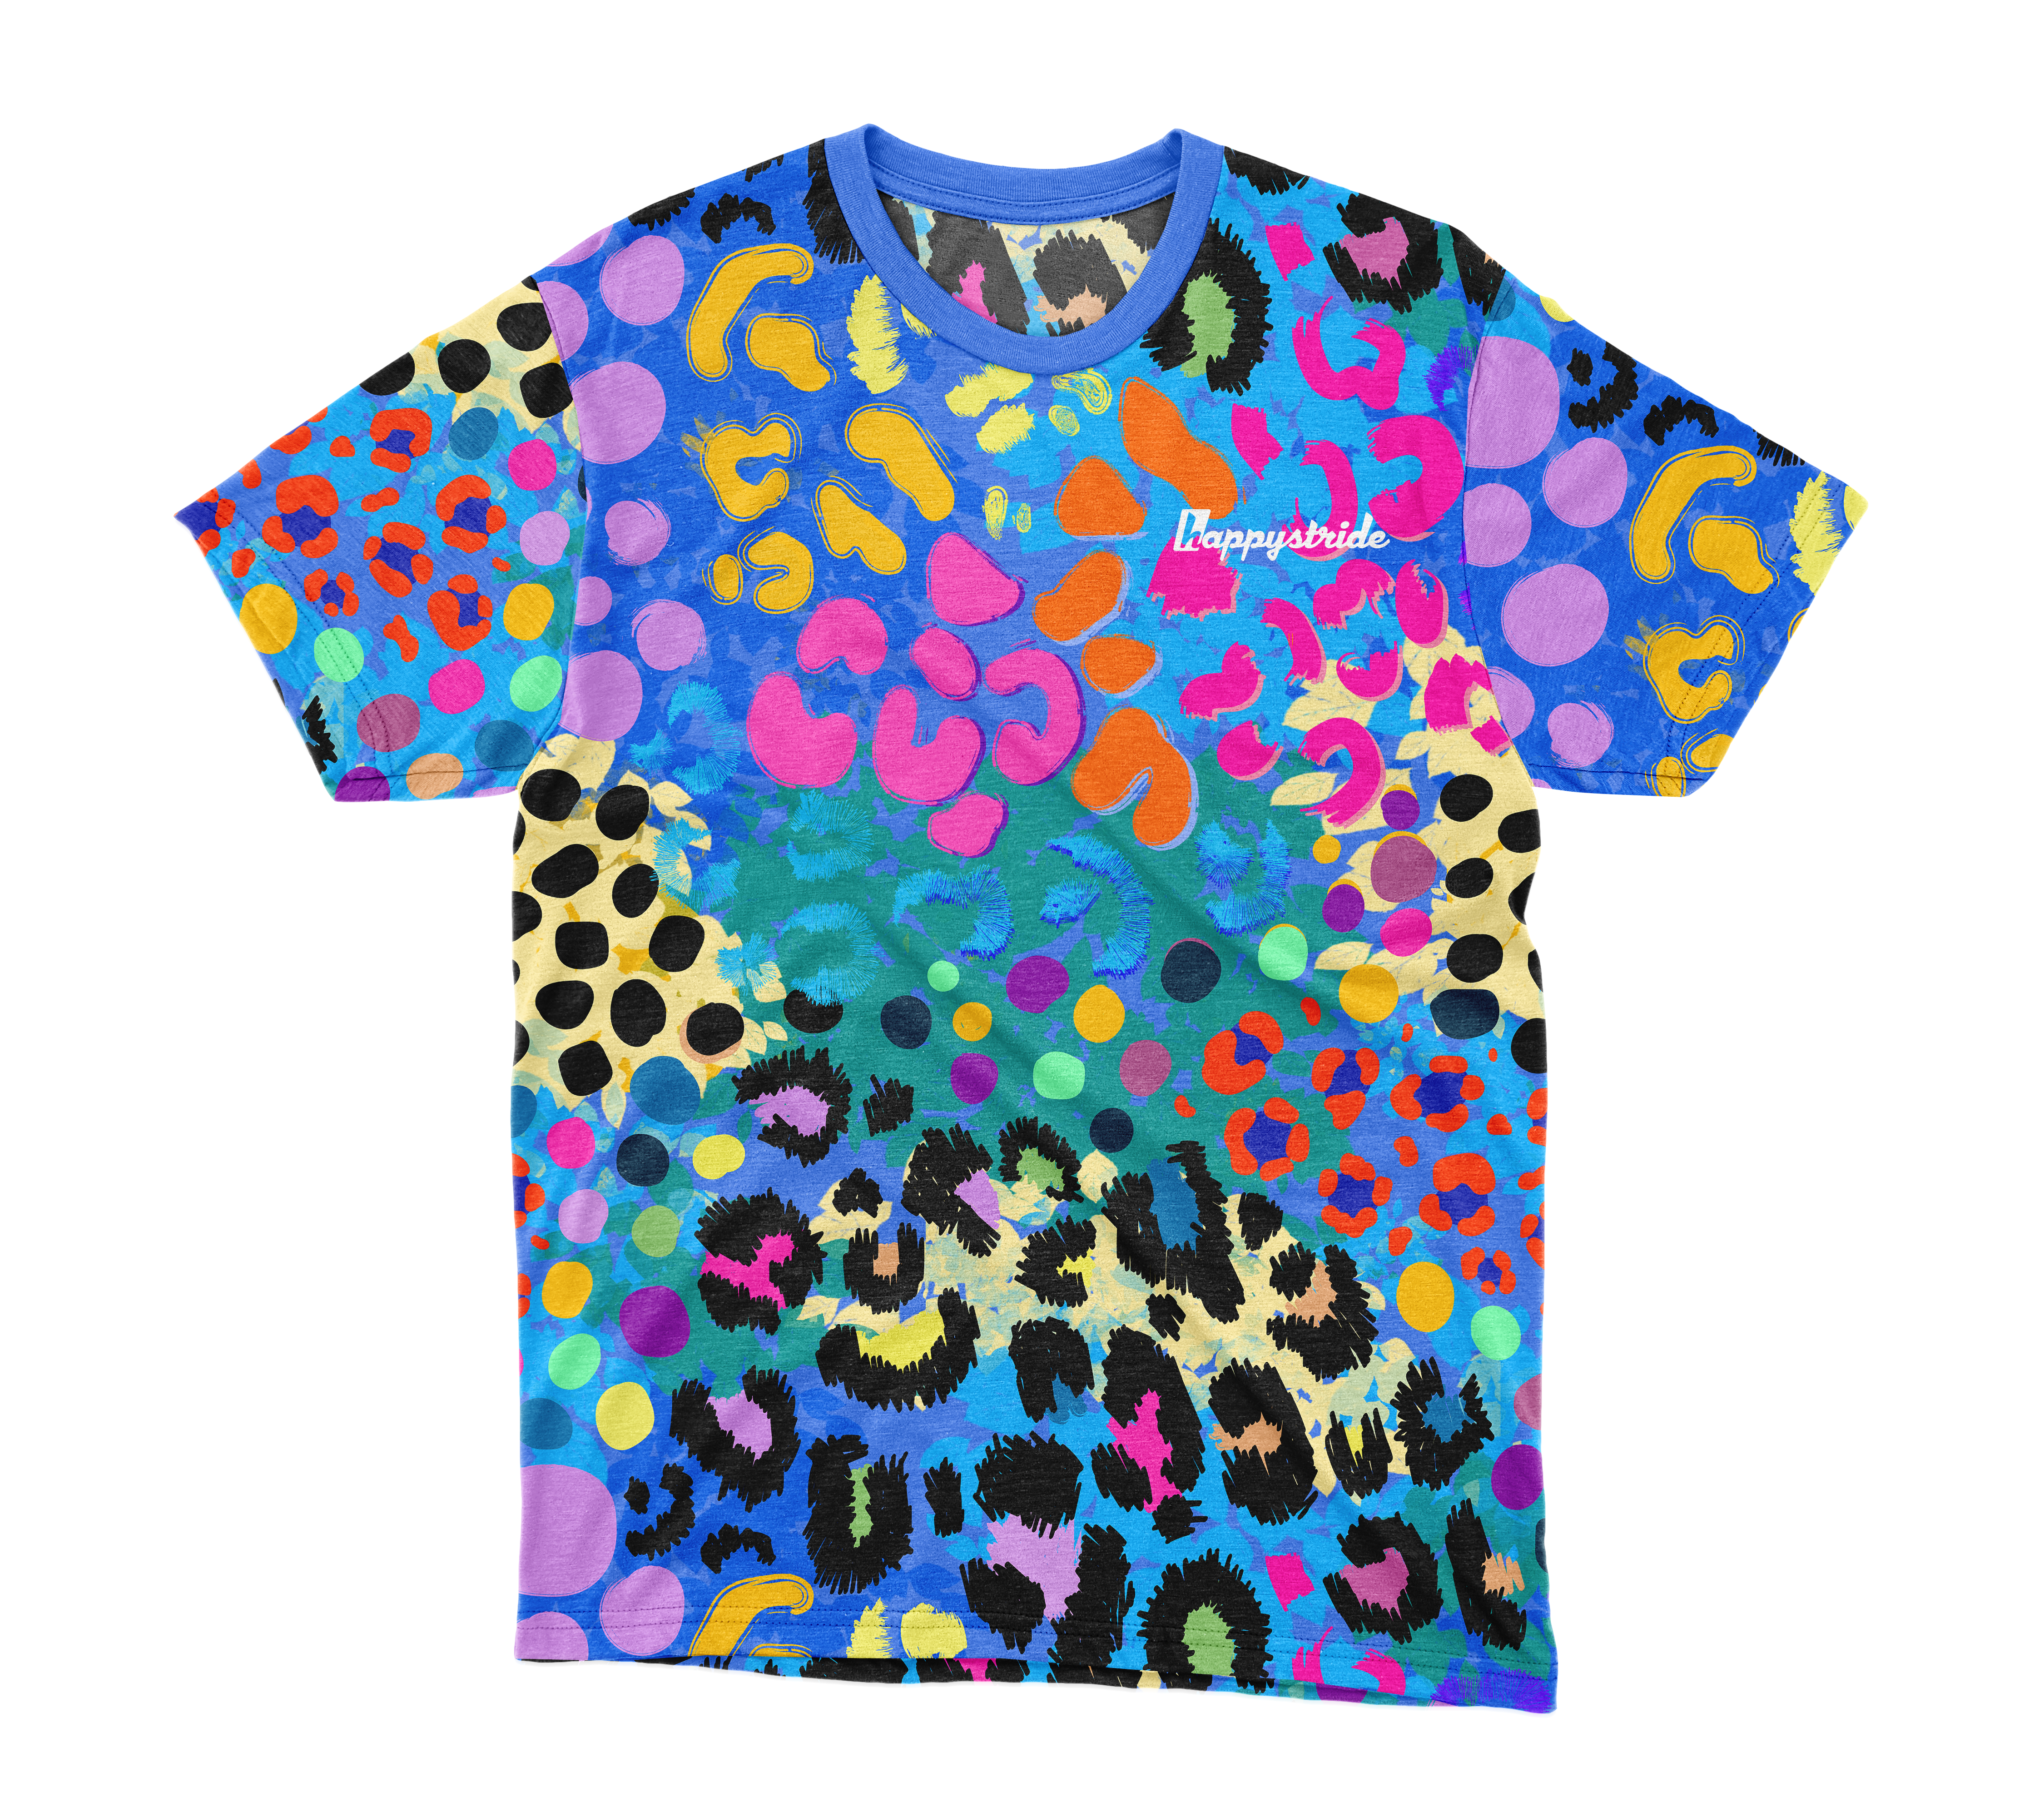 ''Get spotted" wild tribe t-shirt